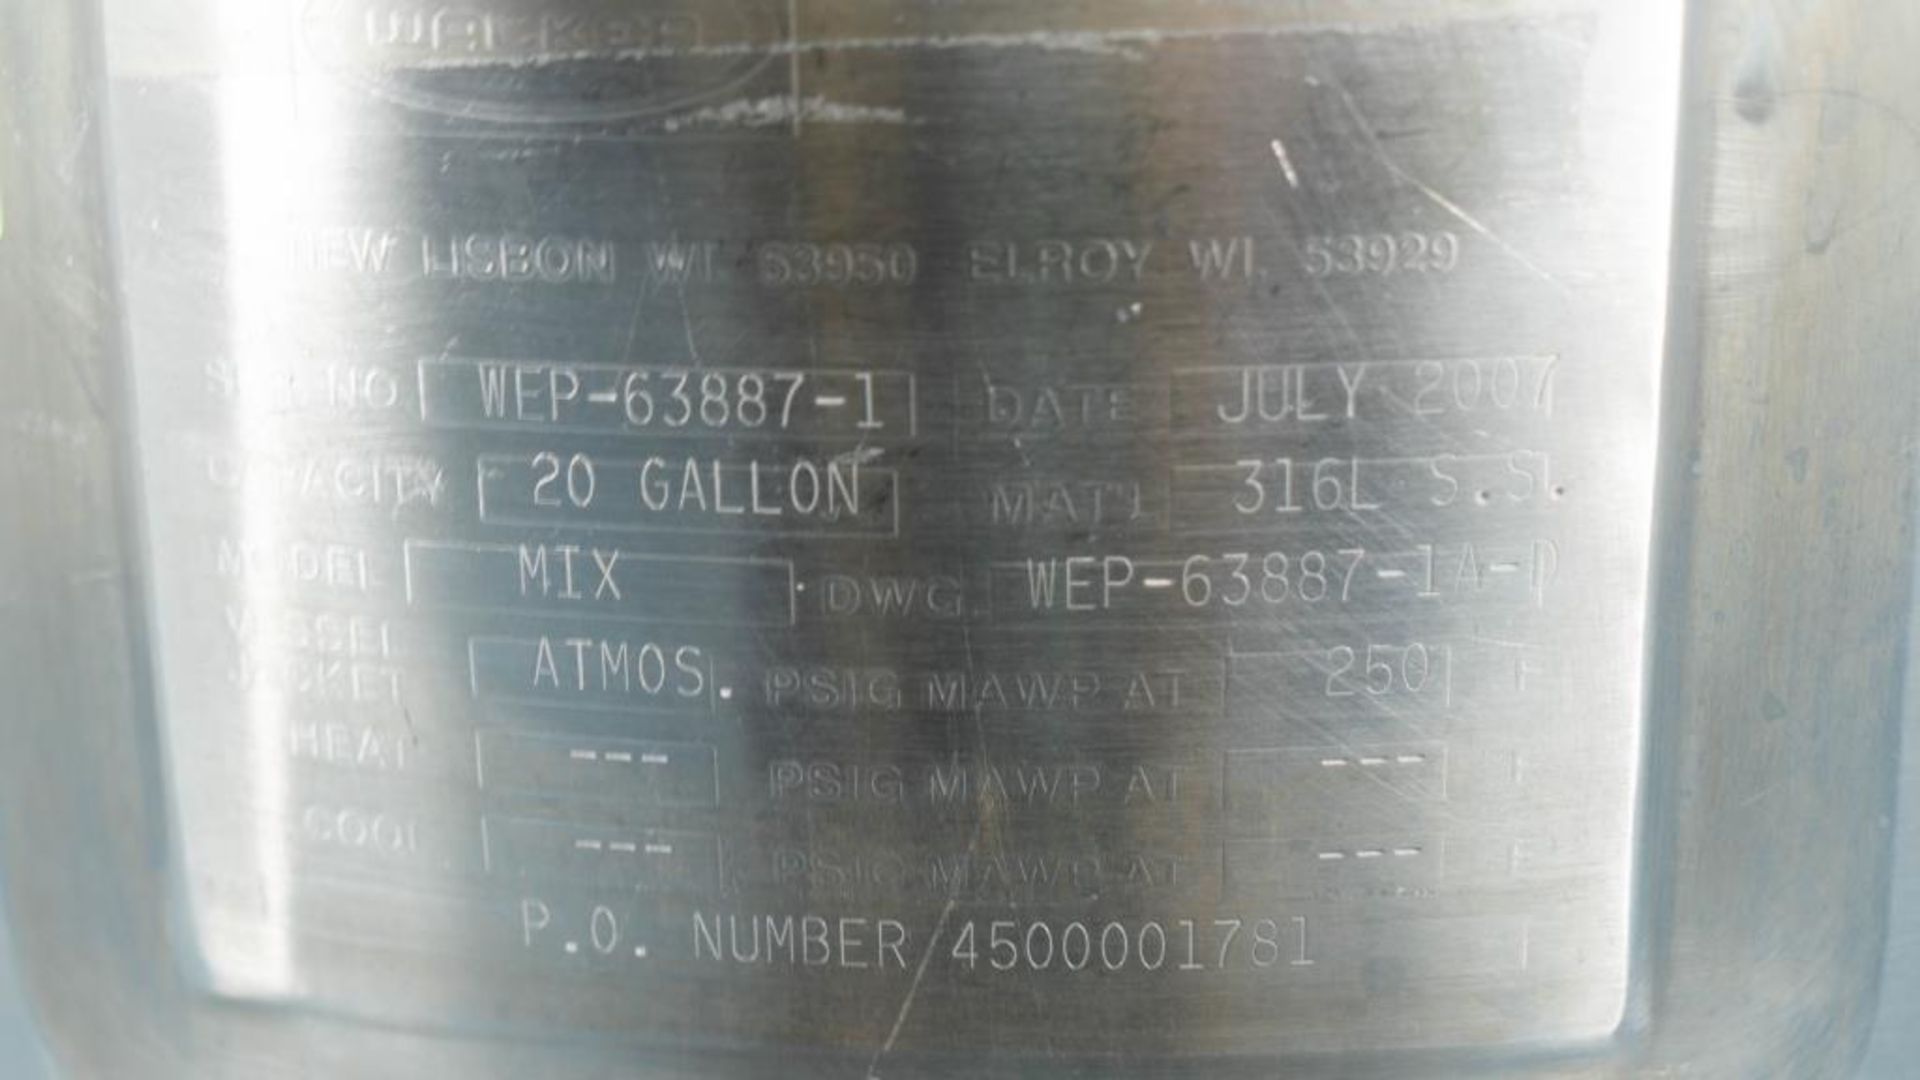 Walker 20 Gallon Stainless Steel Mixing Tank - Image 7 of 8